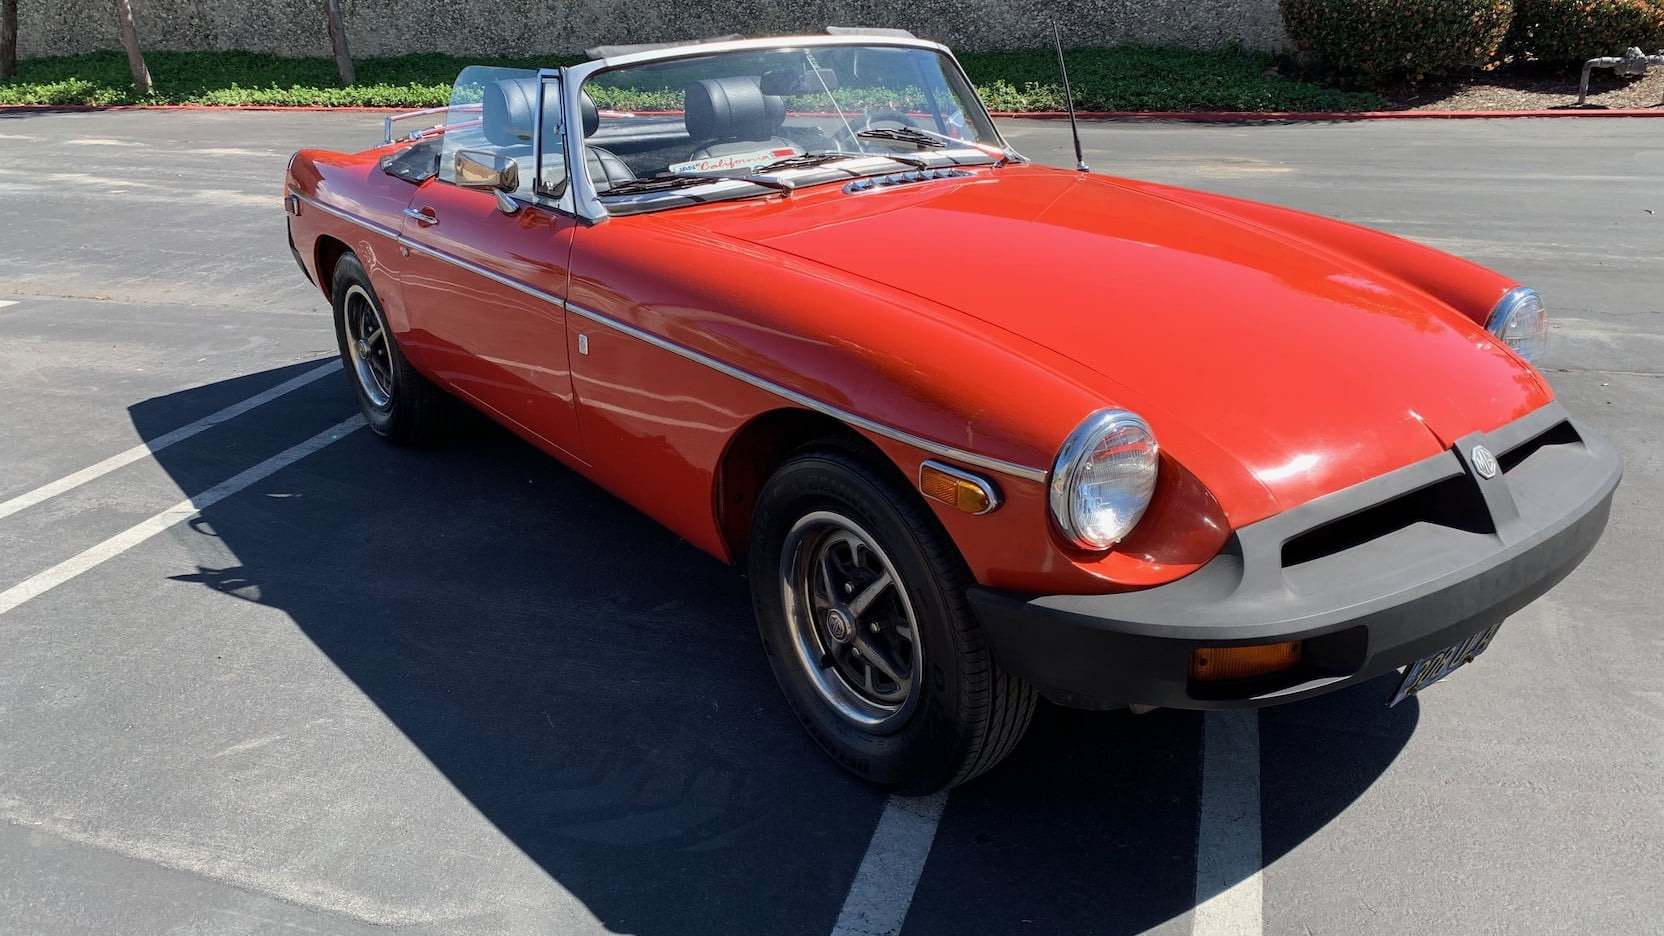 1975 MG MGB with the redesigned front end